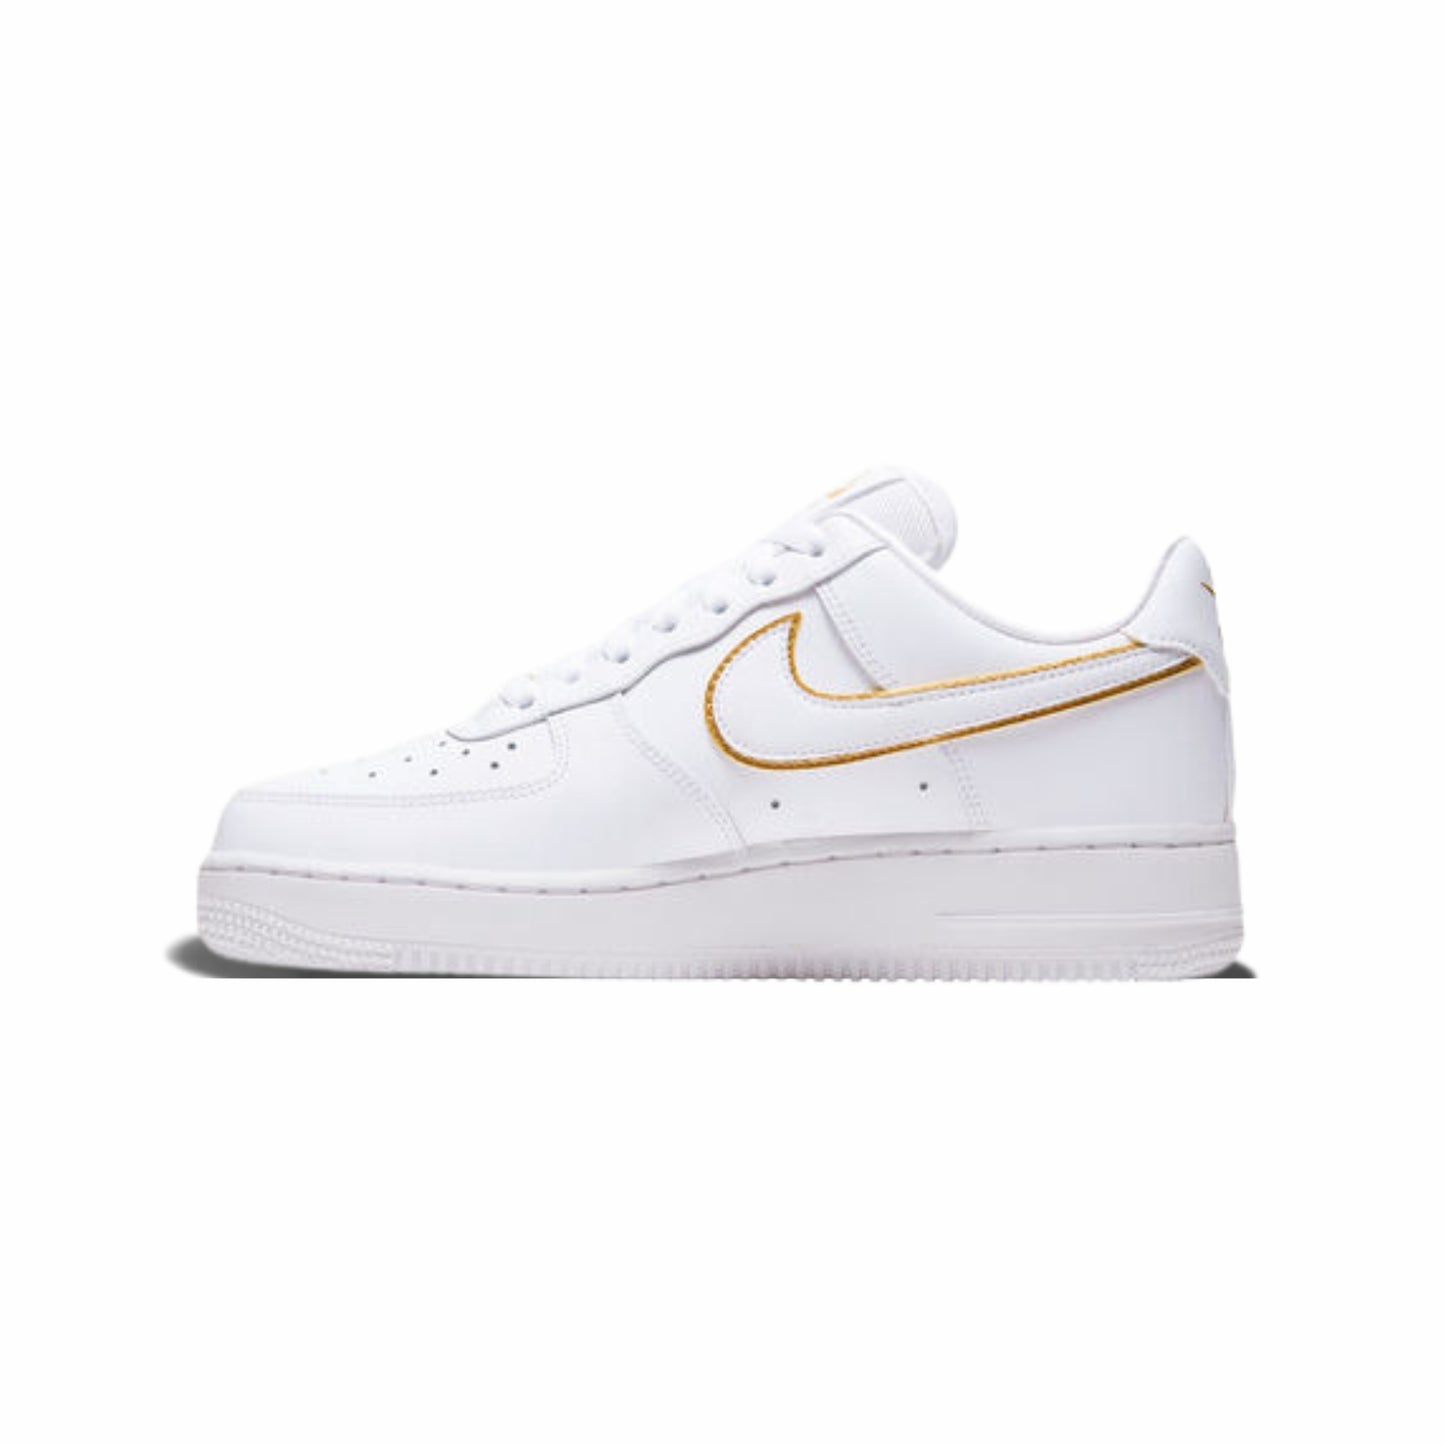 NIKE AIR FORCE 1 "WHITE GOLDEN"